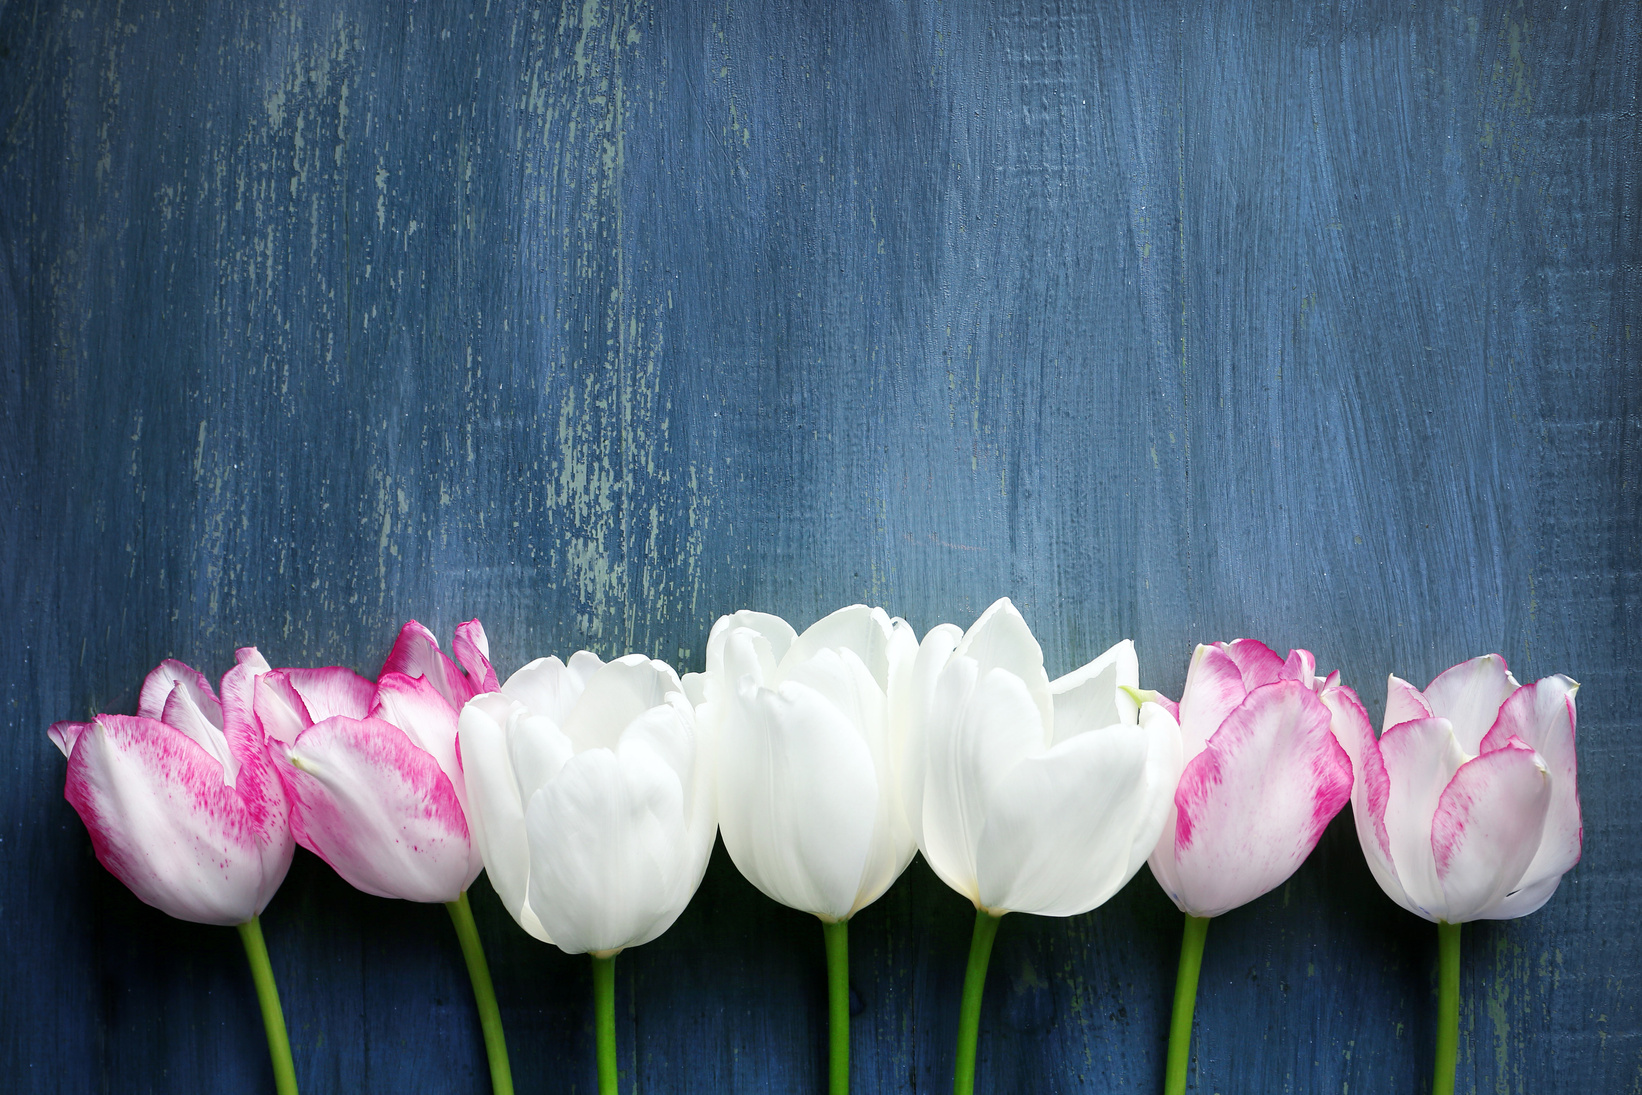 Row of Pink and White Tulips with Wooden Background